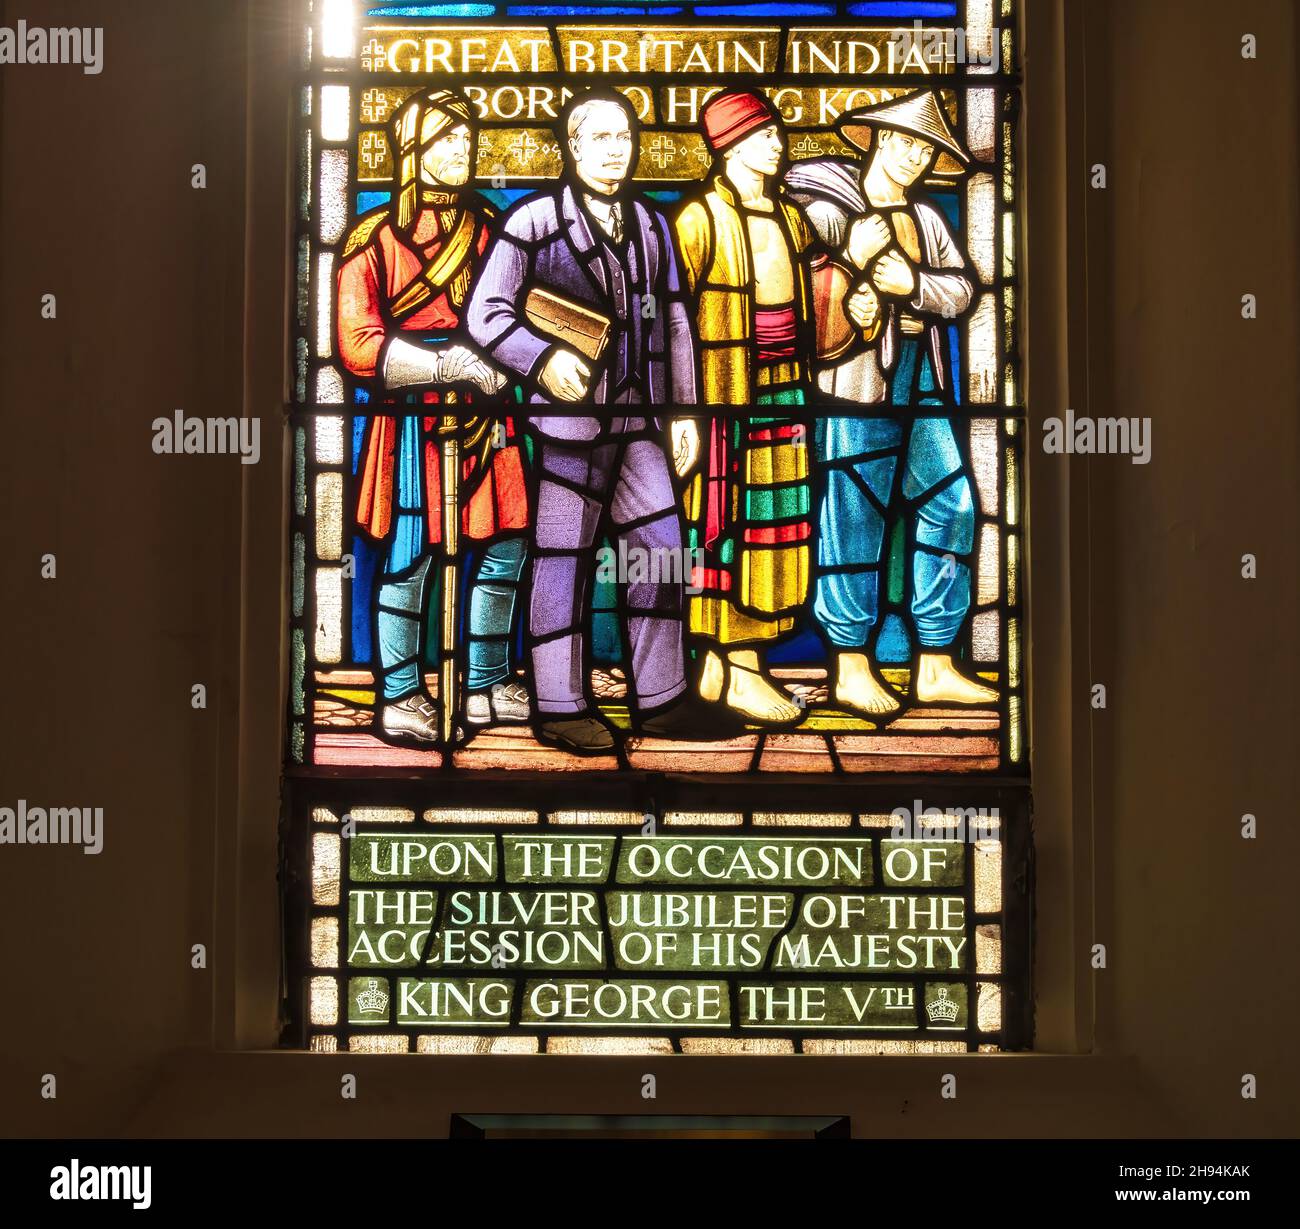 Stained glass window in the interior architecture details of the Saint George Chapel which is part of the Anglican Cathedral Church of St. James. Nov. Stock Photo